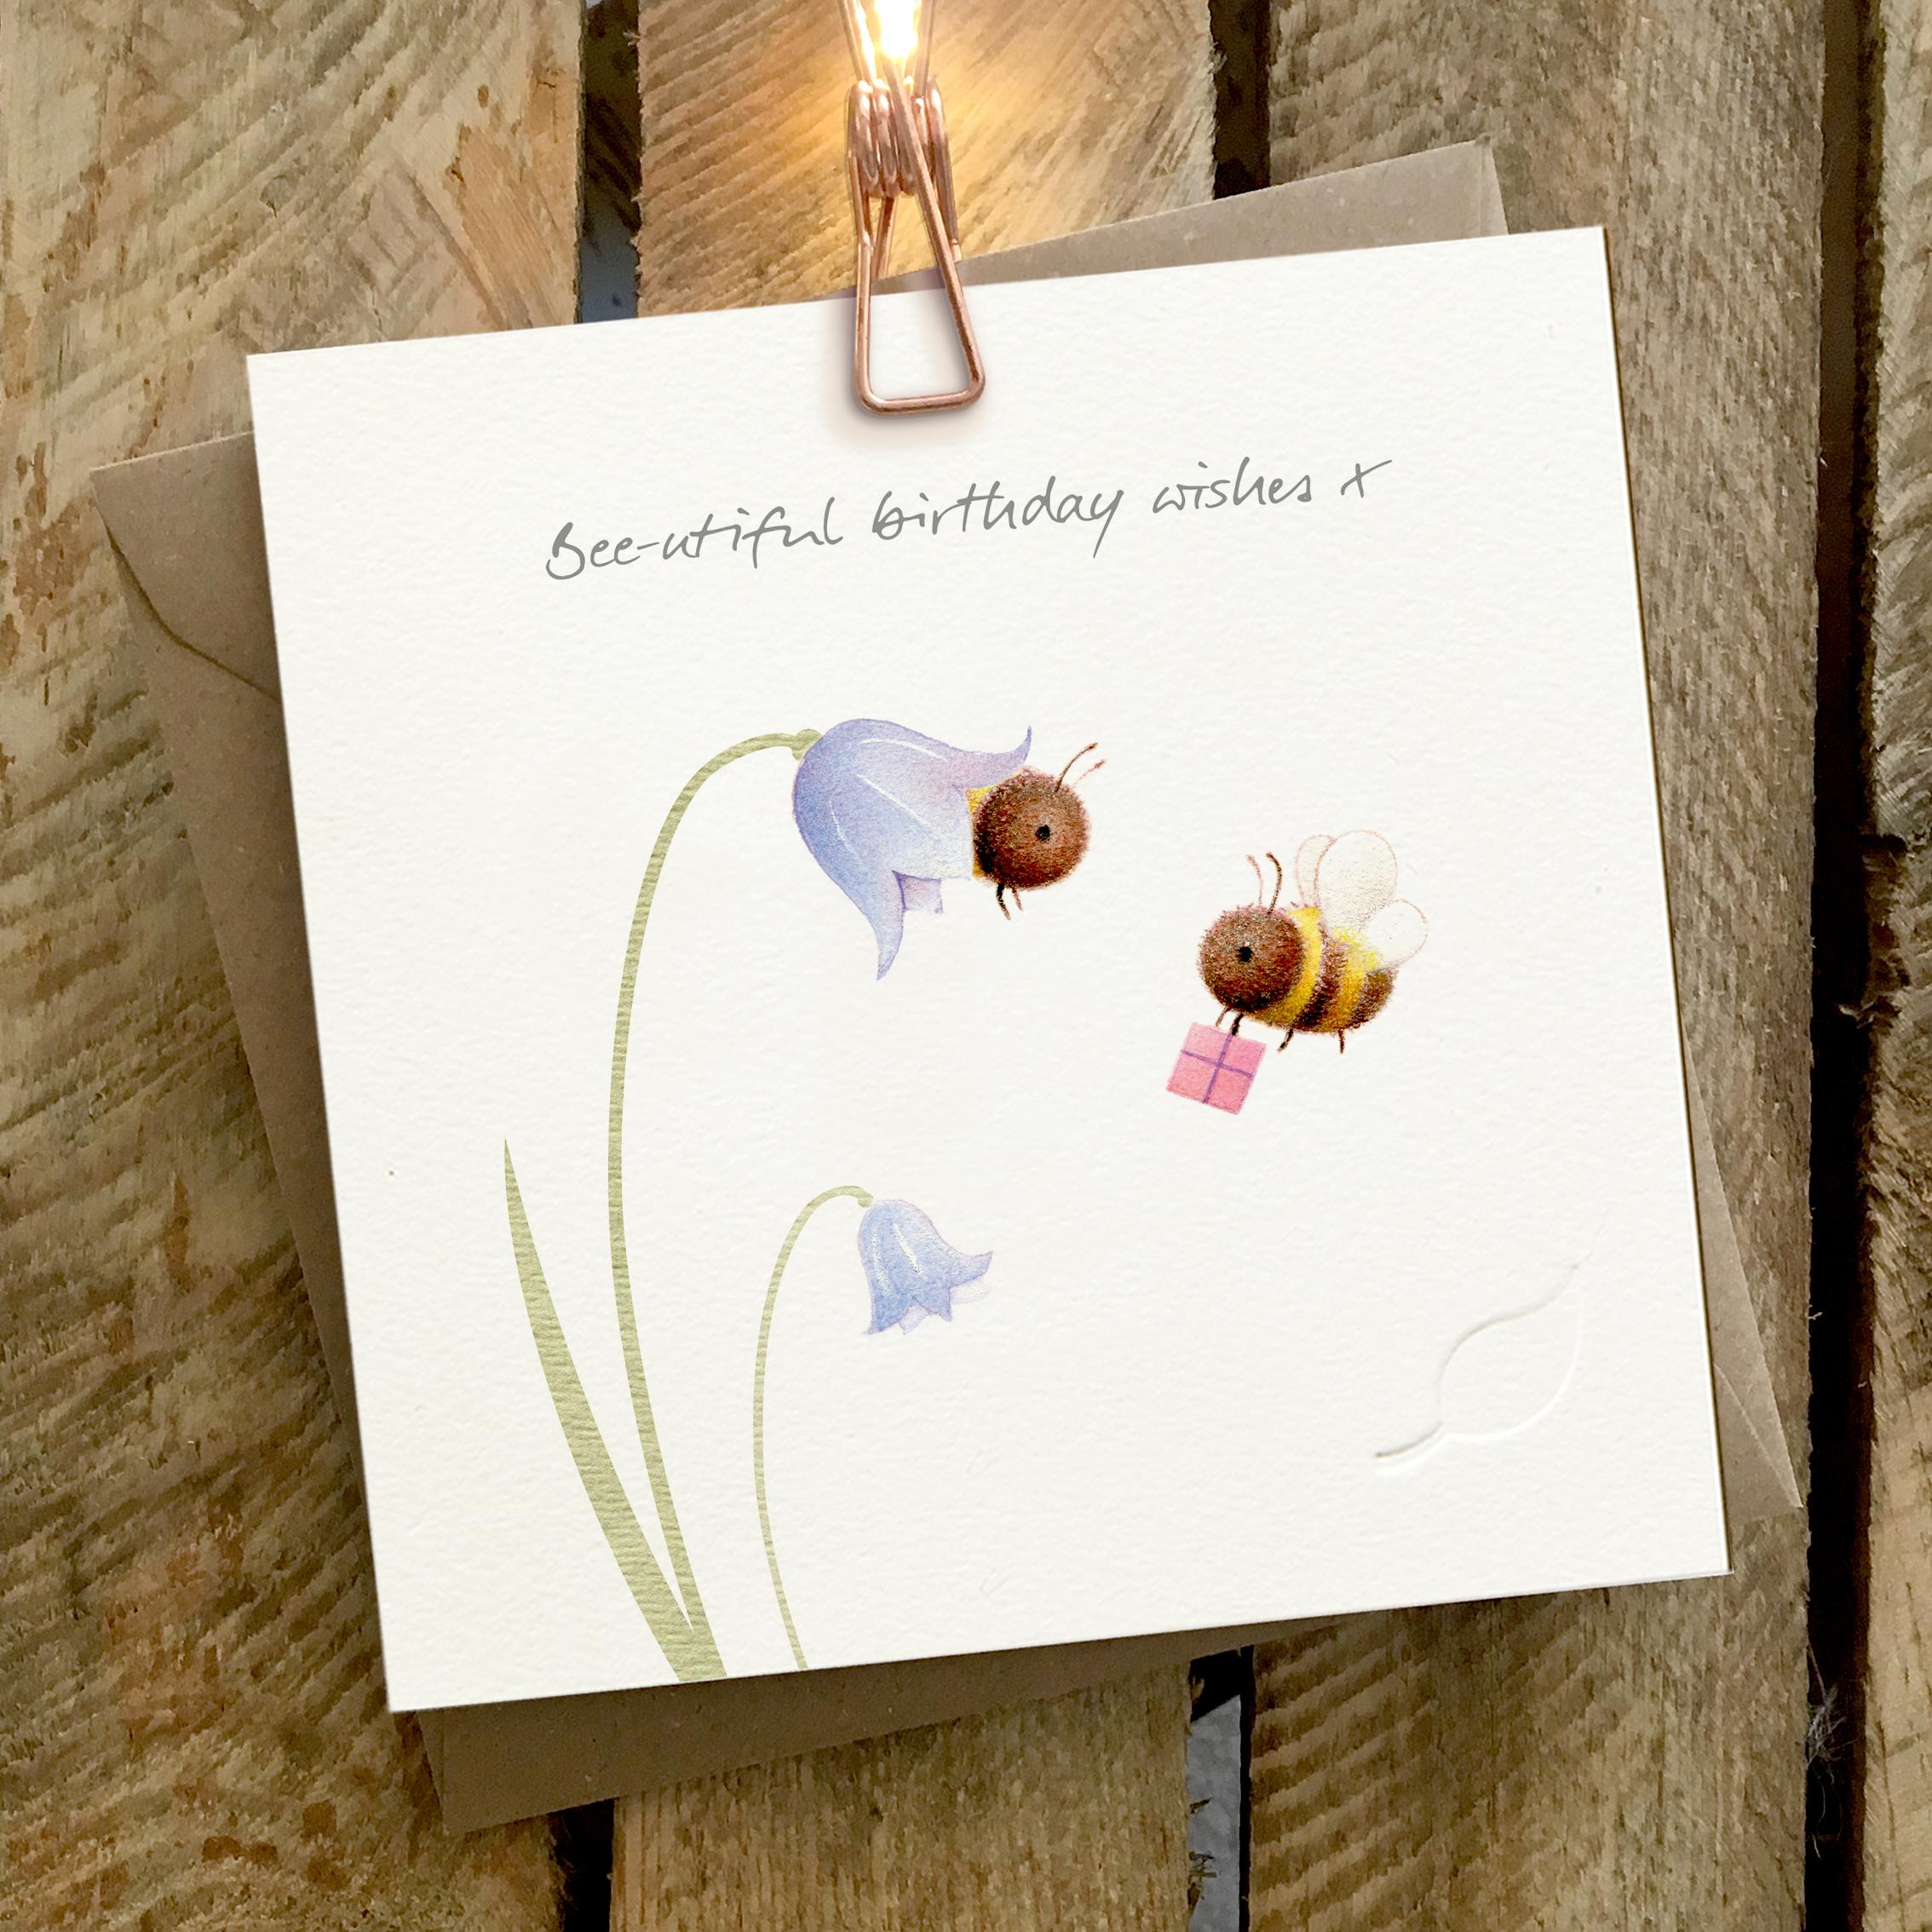 Card featuring two cute bees buzzing around bluebells. Caption reads ‘Bee-utiful birthday wishes x’.